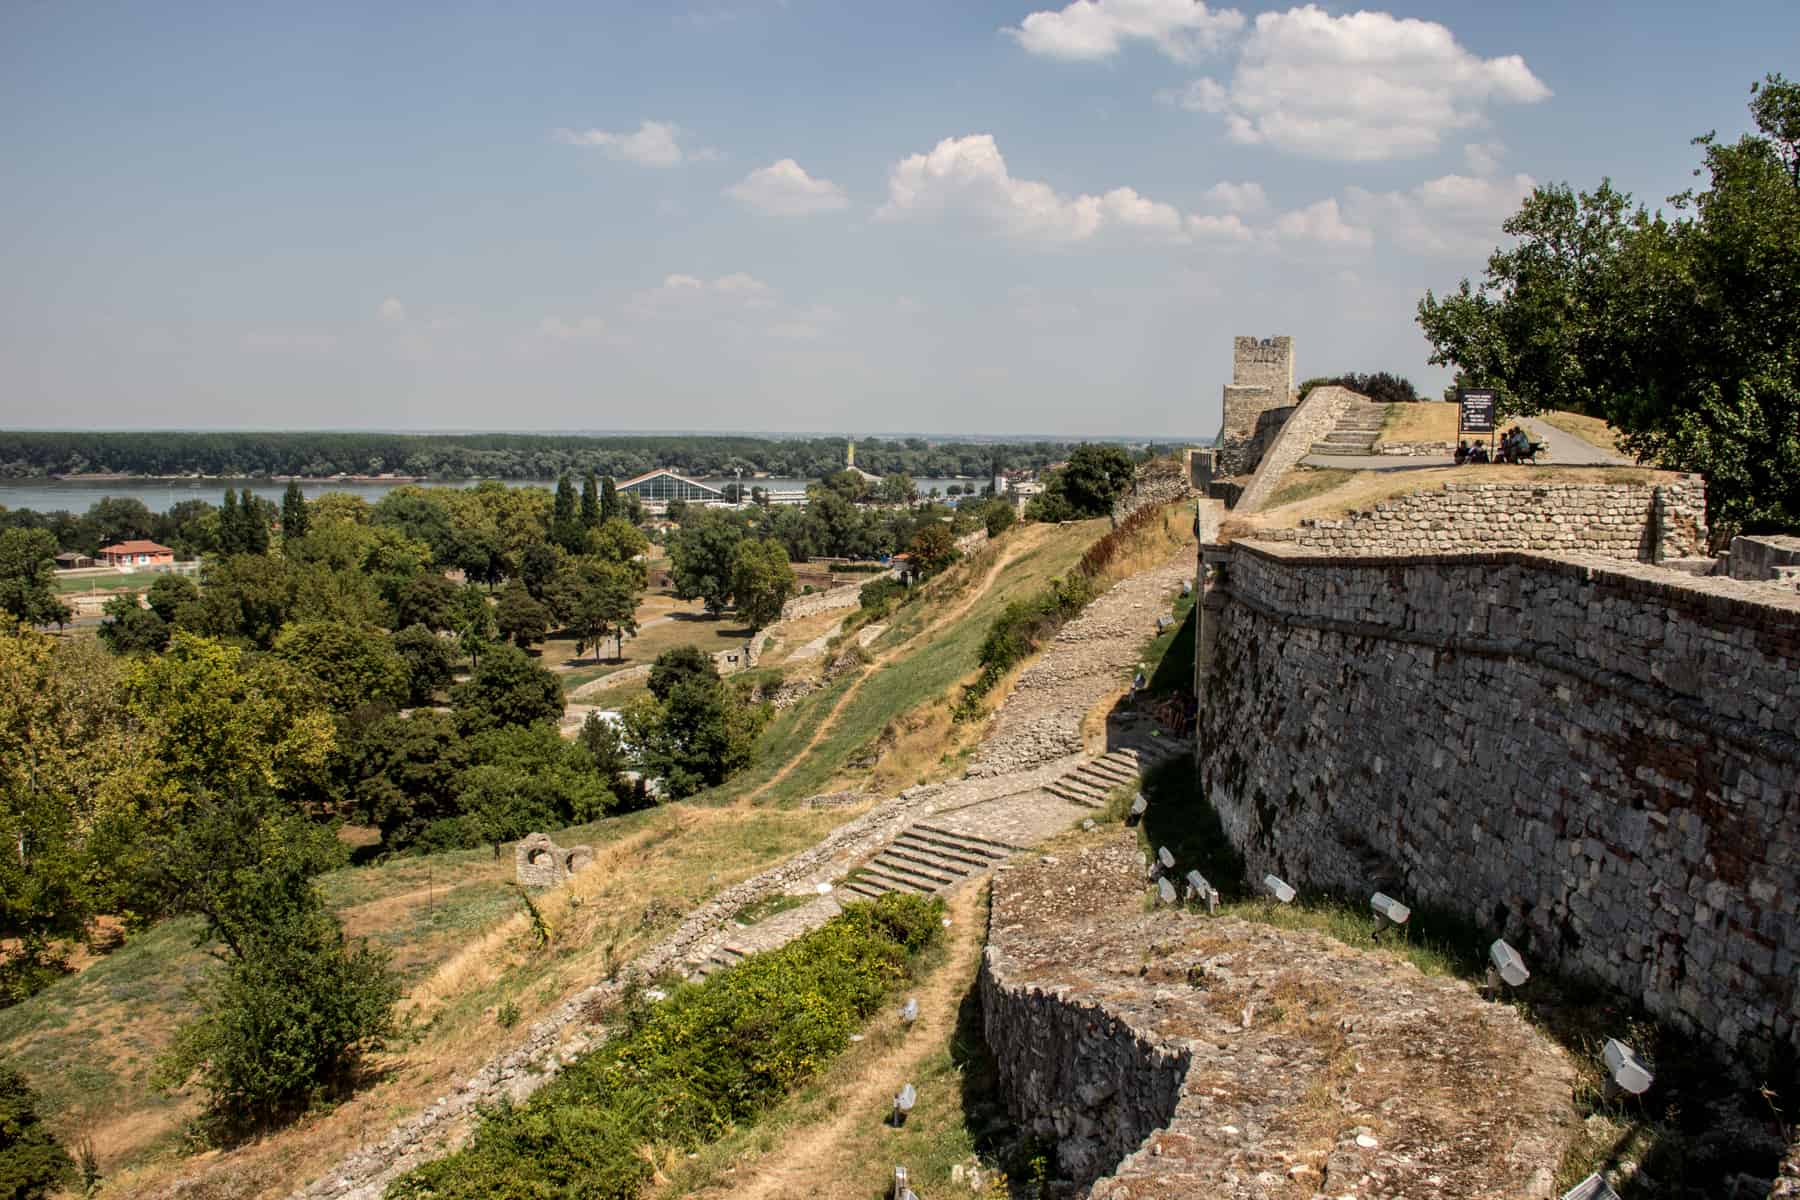 Stone walls and staircases of the hilltop Belgrade Fortress, overlooking a forested area next to a River. 